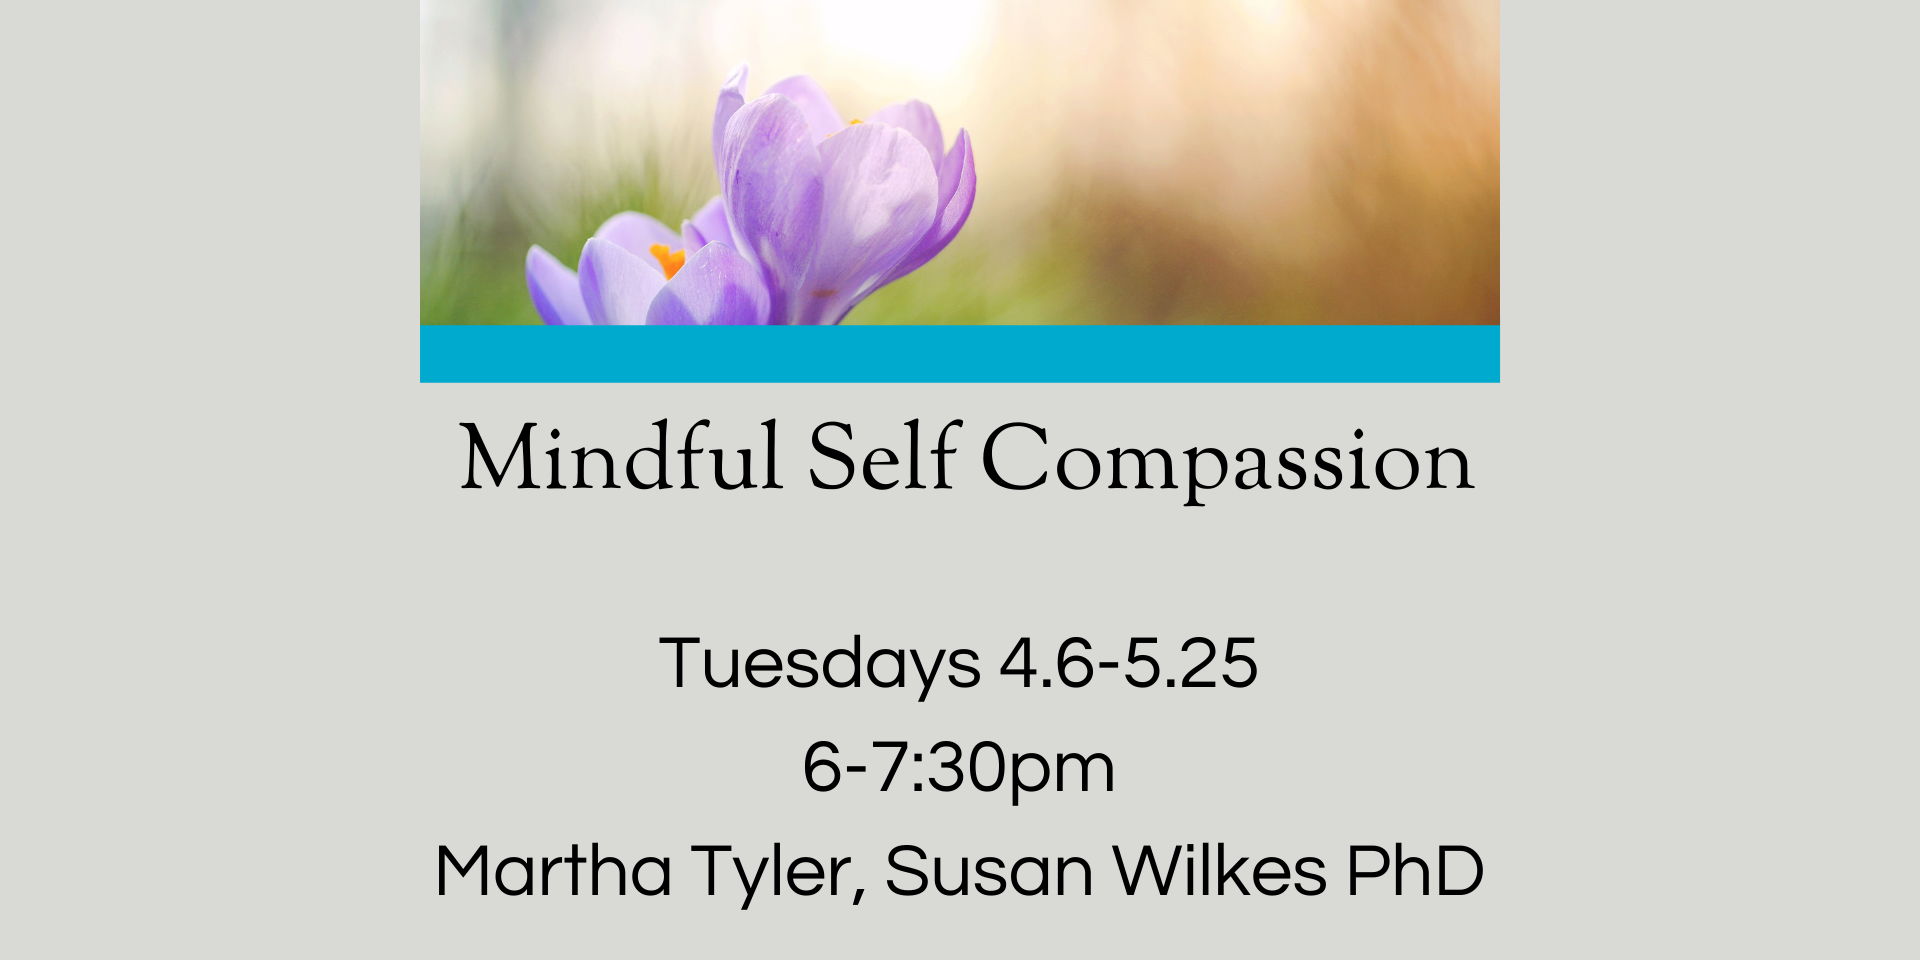 Mindful Self Compassion promotional image